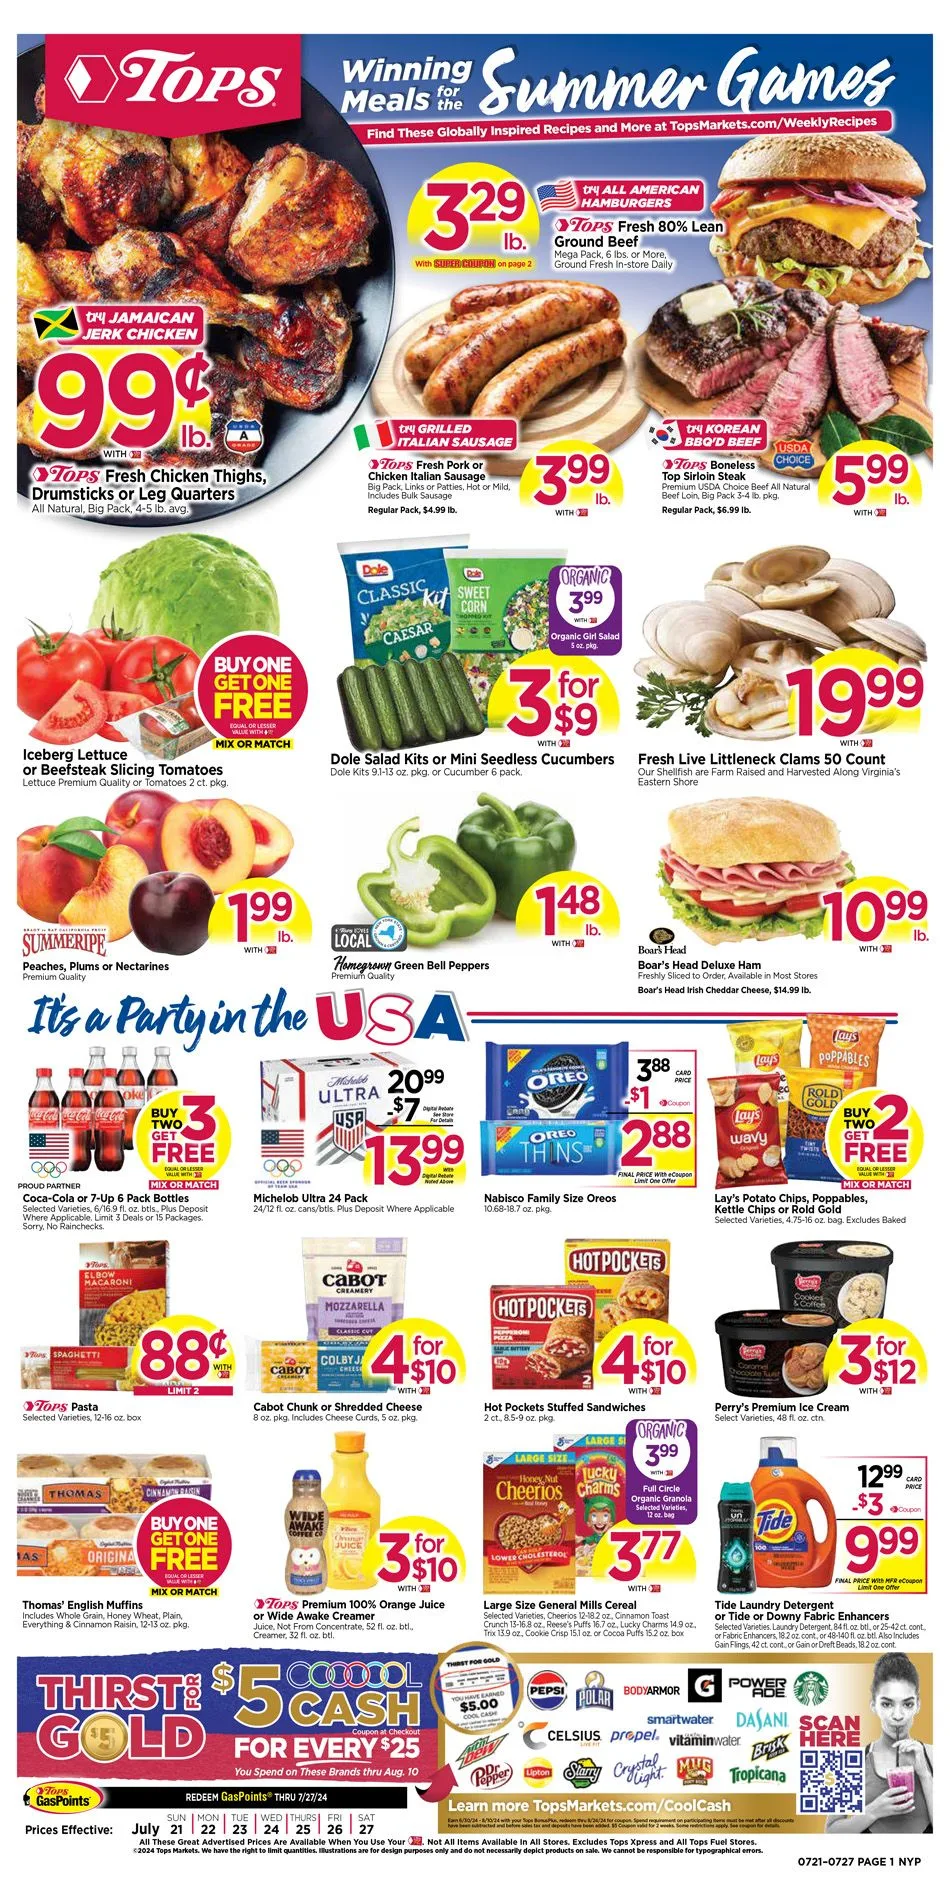 Tops Weekly Ad 7_21_24 pg 1